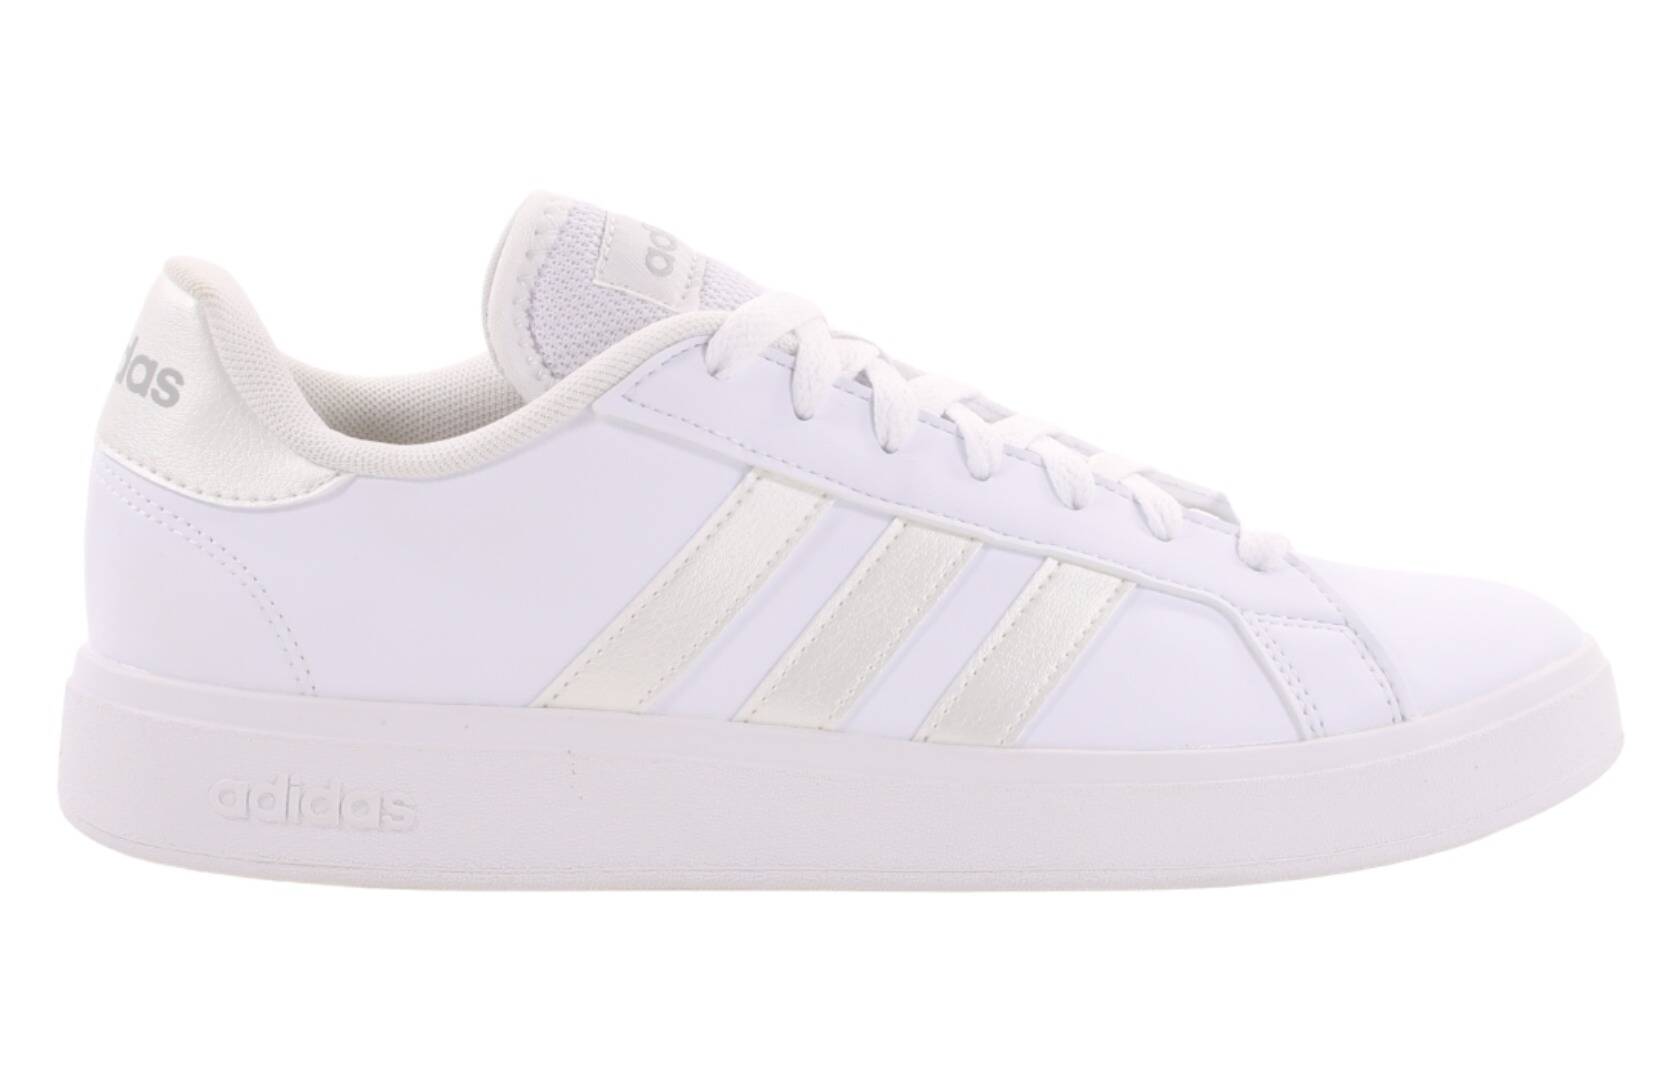 Adidas GRAND COURT BASE 2 women's shoes. GY9869